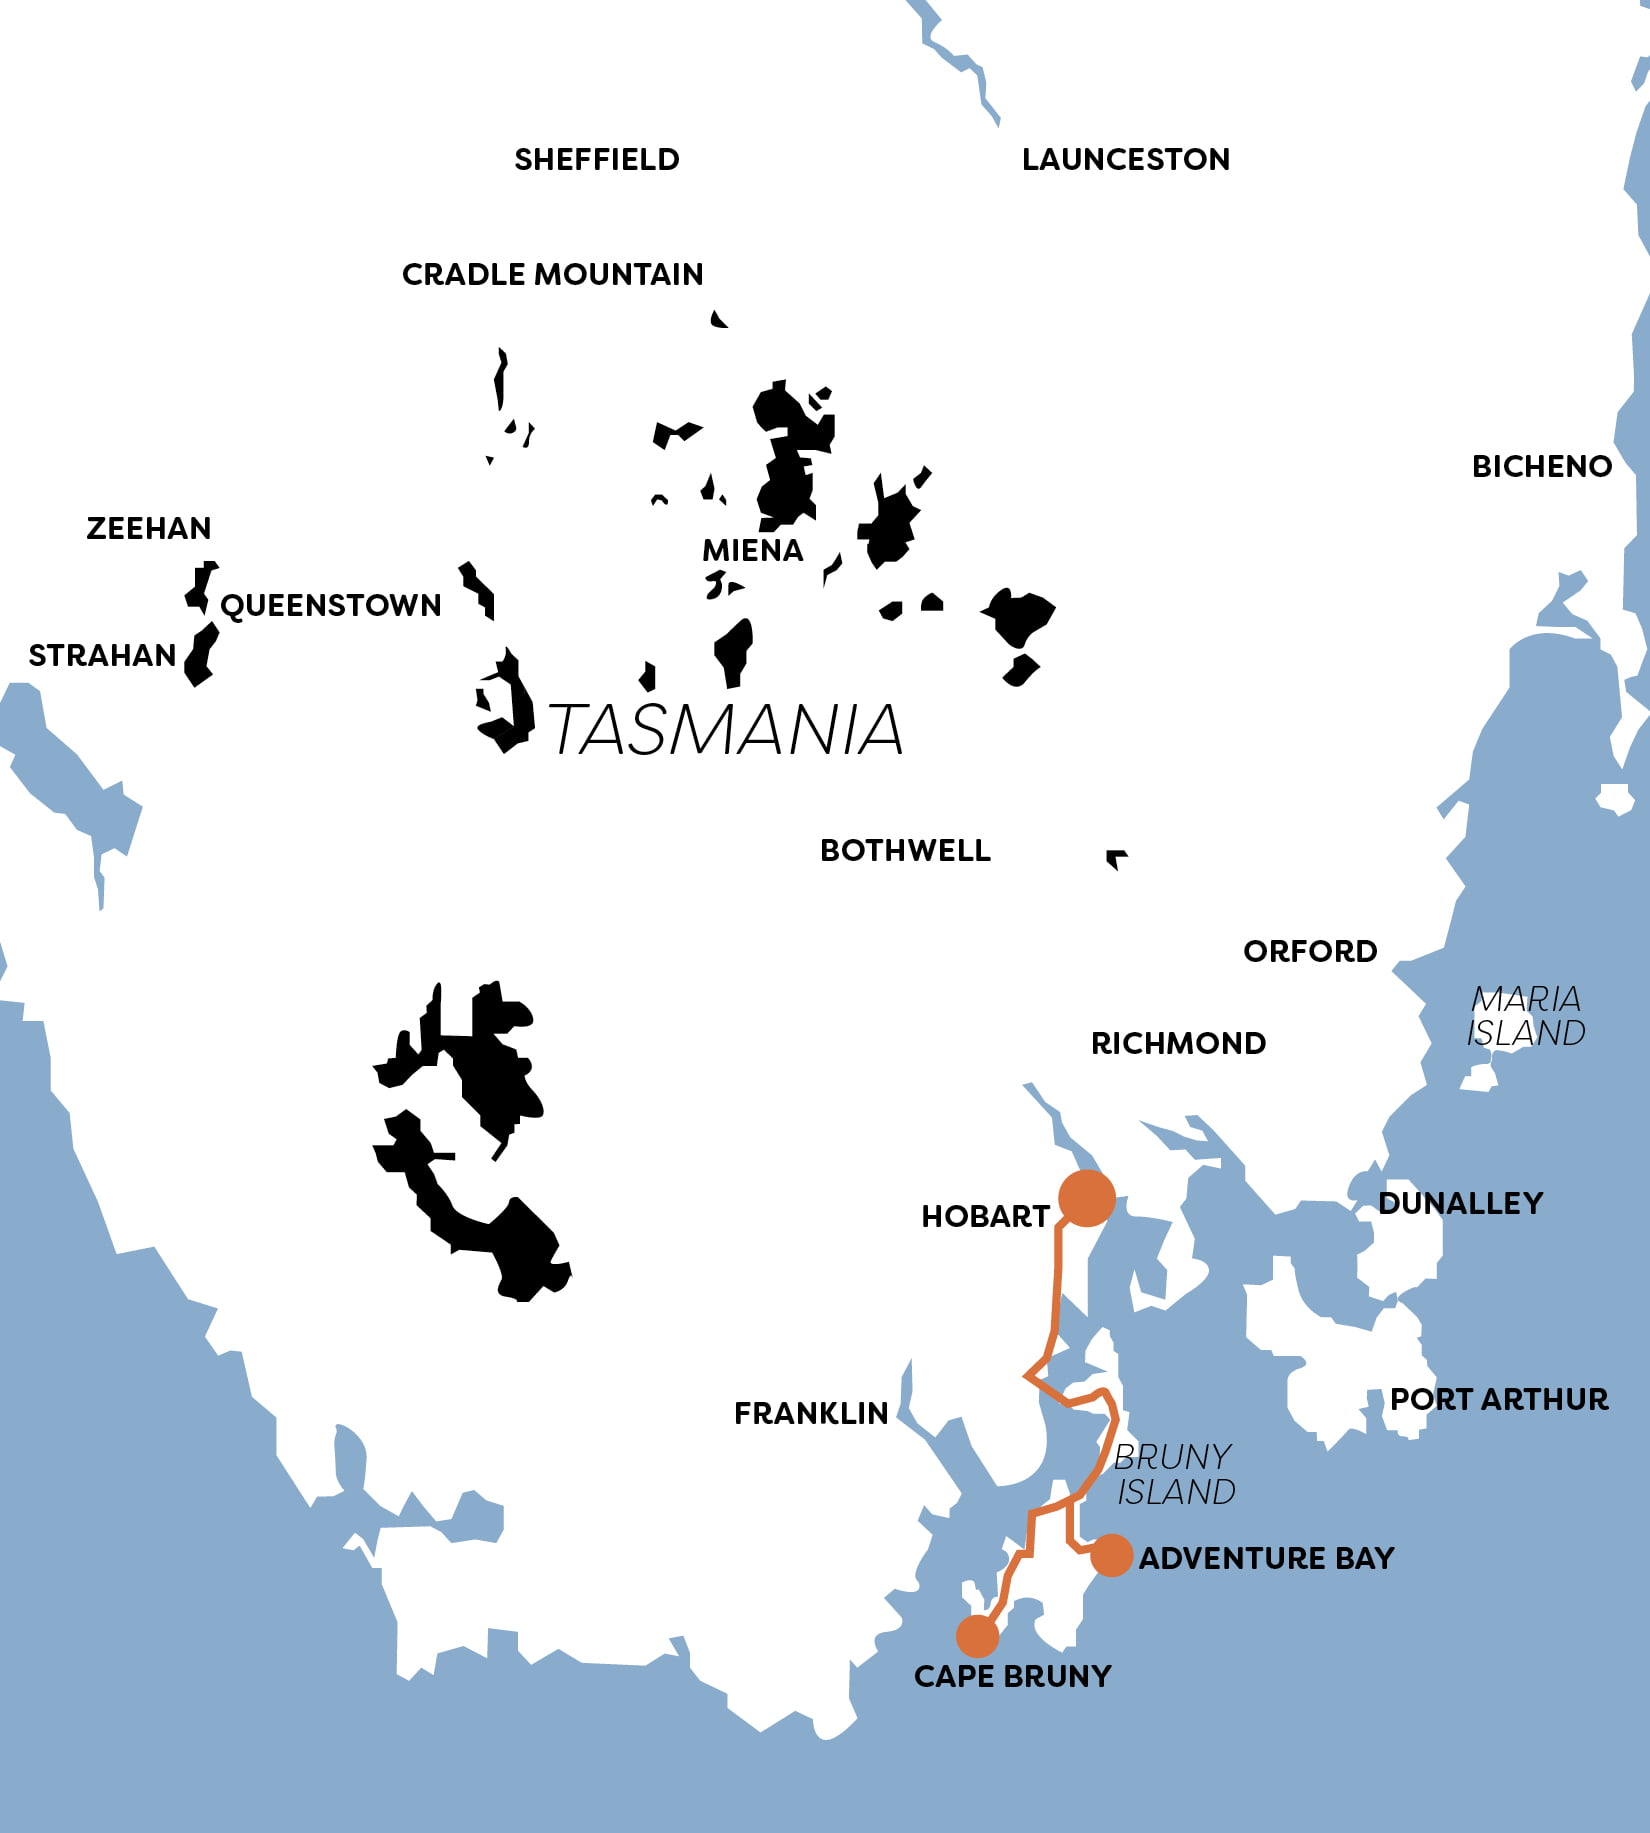 Bruny Island day tour map, showing the destinations of Adventure bay and Cape Bruny